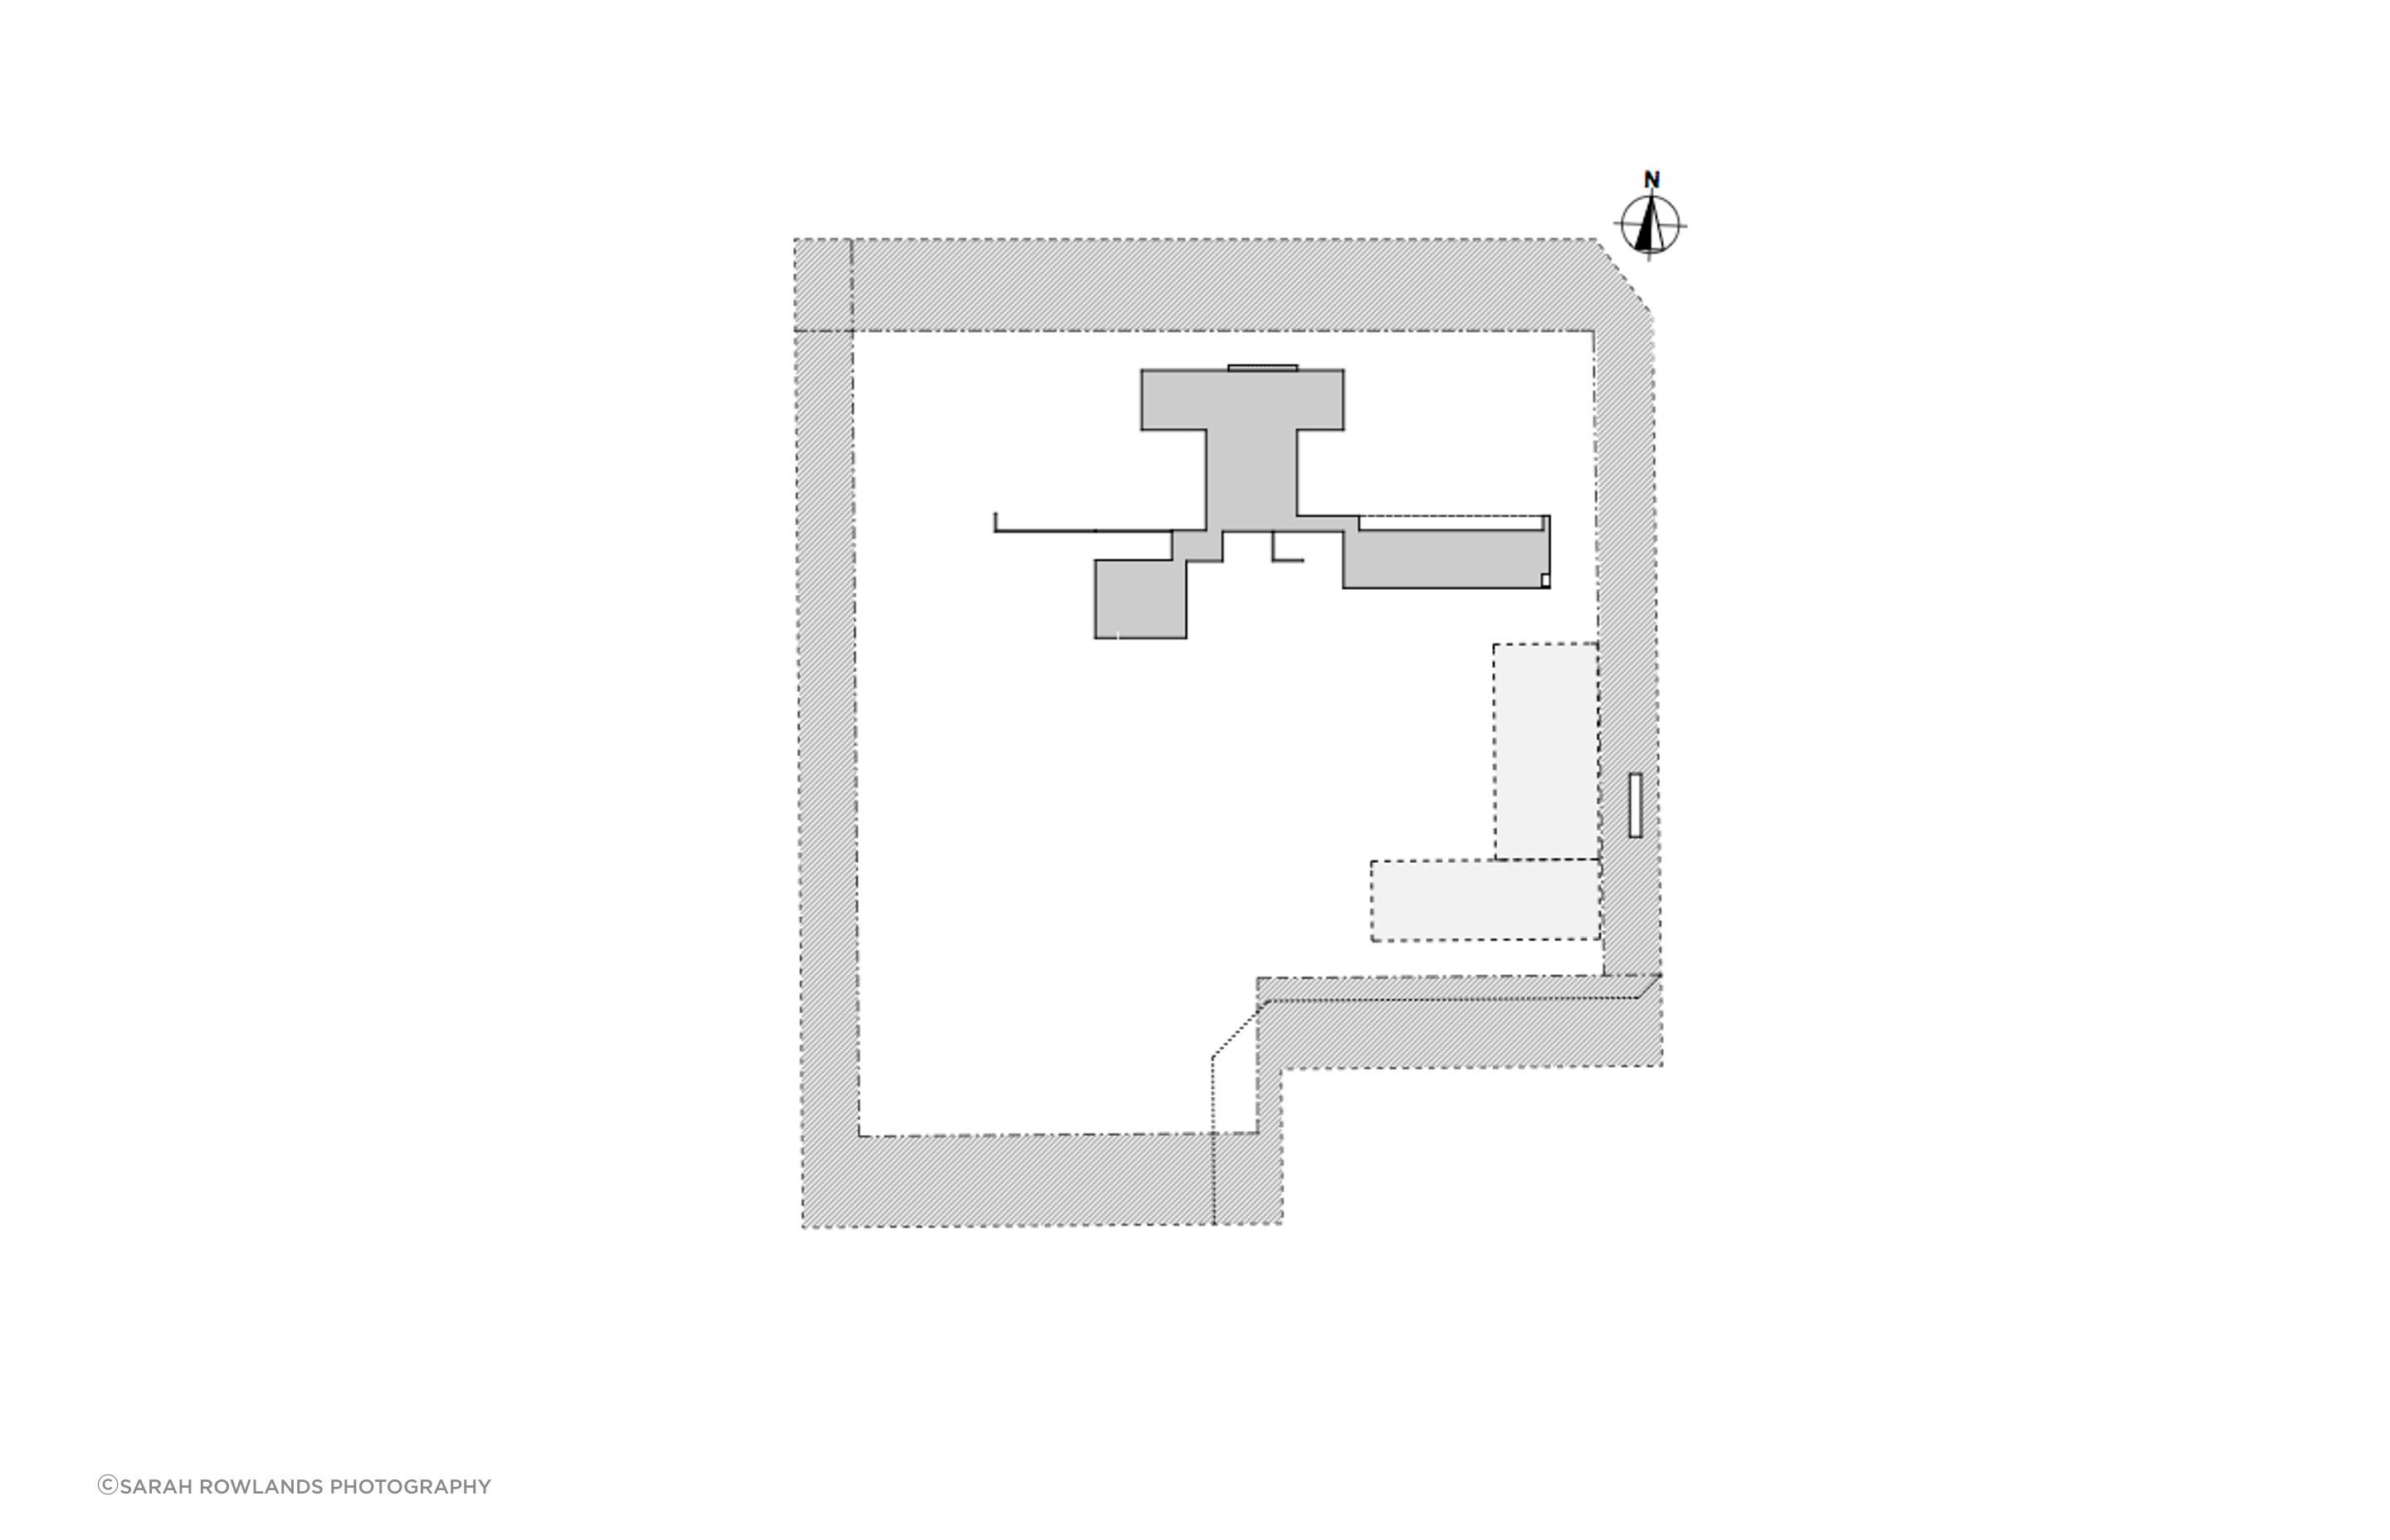 Ryan House site plan by Arthouse Architects.